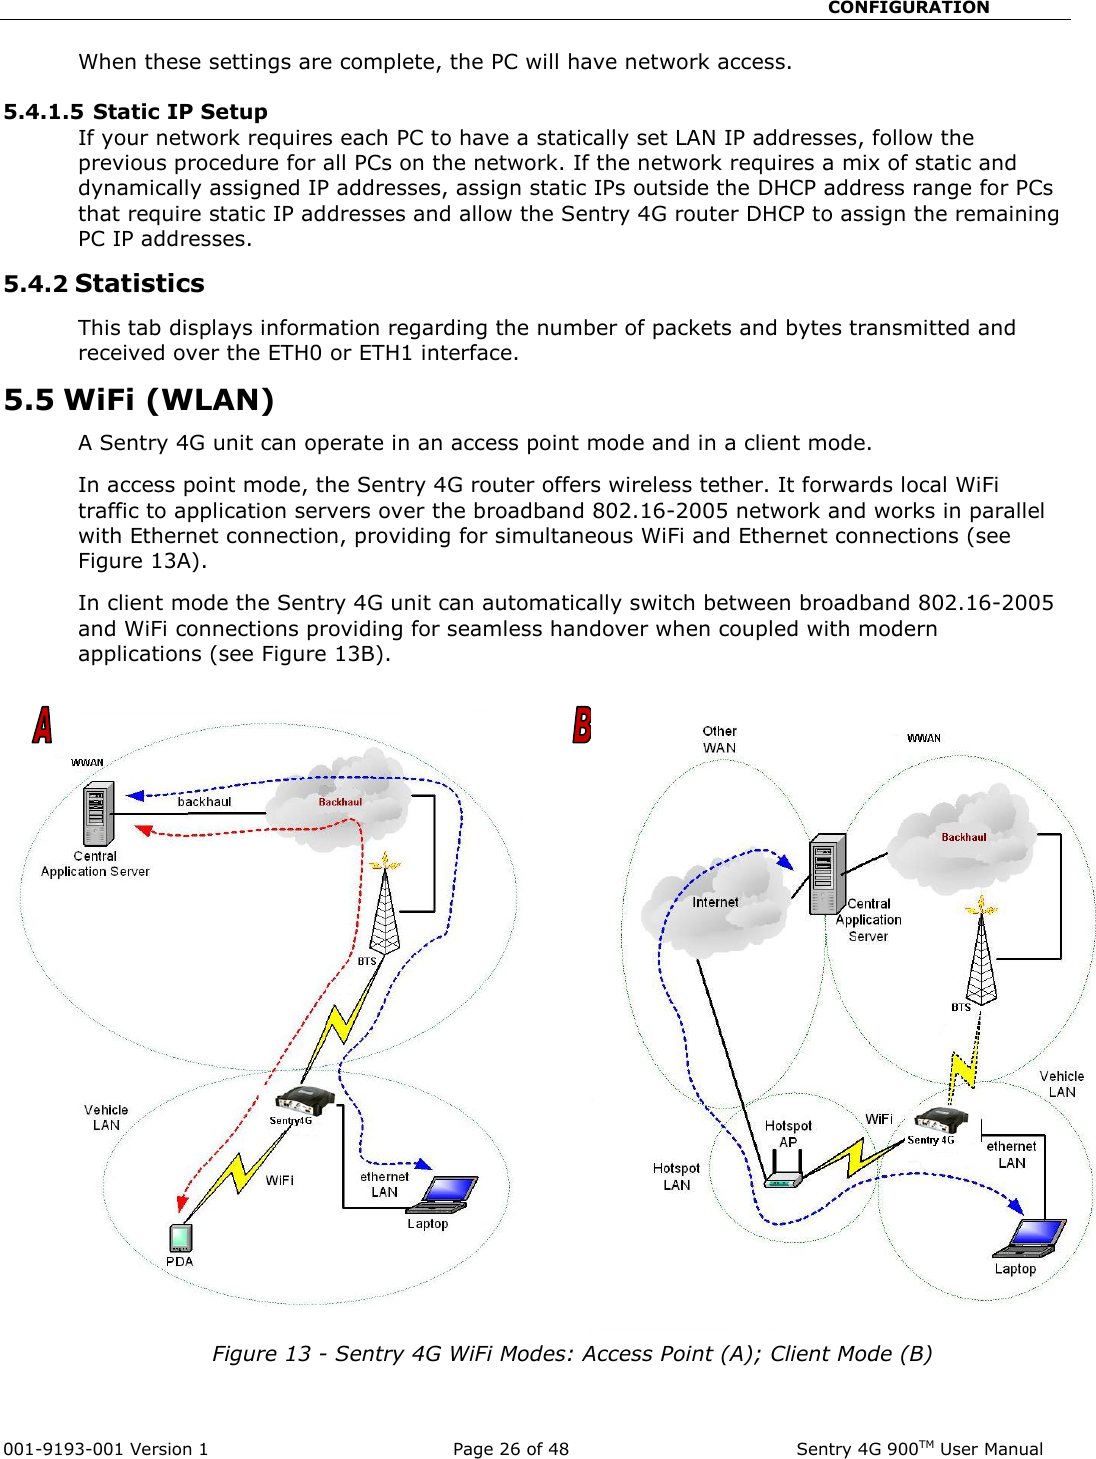                                                       CONFIGURATION  001-9193-001 Version 1              Page 26 of 48               Sentry 4G 900TM User Manual When these settings are complete, the PC will have network access.    5.4.1.5 Static IP Setup If your network requires each PC to have a statically set LAN IP addresses, follow the previous procedure for all PCs on the network. If the network requires a mix of static and dynamically assigned IP addresses, assign static IPs outside the DHCP address range for PCs that require static IP addresses and allow the Sentry 4G router DHCP to assign the remaining PC IP addresses. 5.4.2 Statistics  This tab displays information regarding the number of packets and bytes transmitted and received over the ETH0 or ETH1 interface.  5.5 WiFi (WLAN) A Sentry 4G unit can operate in an access point mode and in a client mode. In access point mode, the Sentry 4G router offers wireless tether. It forwards local WiFi traffic to application servers over the broadband 802.16-2005 network and works in parallel with Ethernet connection, providing for simultaneous WiFi and Ethernet connections (see Figure 13A). In client mode the Sentry 4G unit can automatically switch between broadband 802.16-2005 and WiFi connections providing for seamless handover when coupled with modern applications (see Figure 13B).    Figure 13 - Sentry 4G WiFi Modes: Access Point (A); Client Mode (B)   